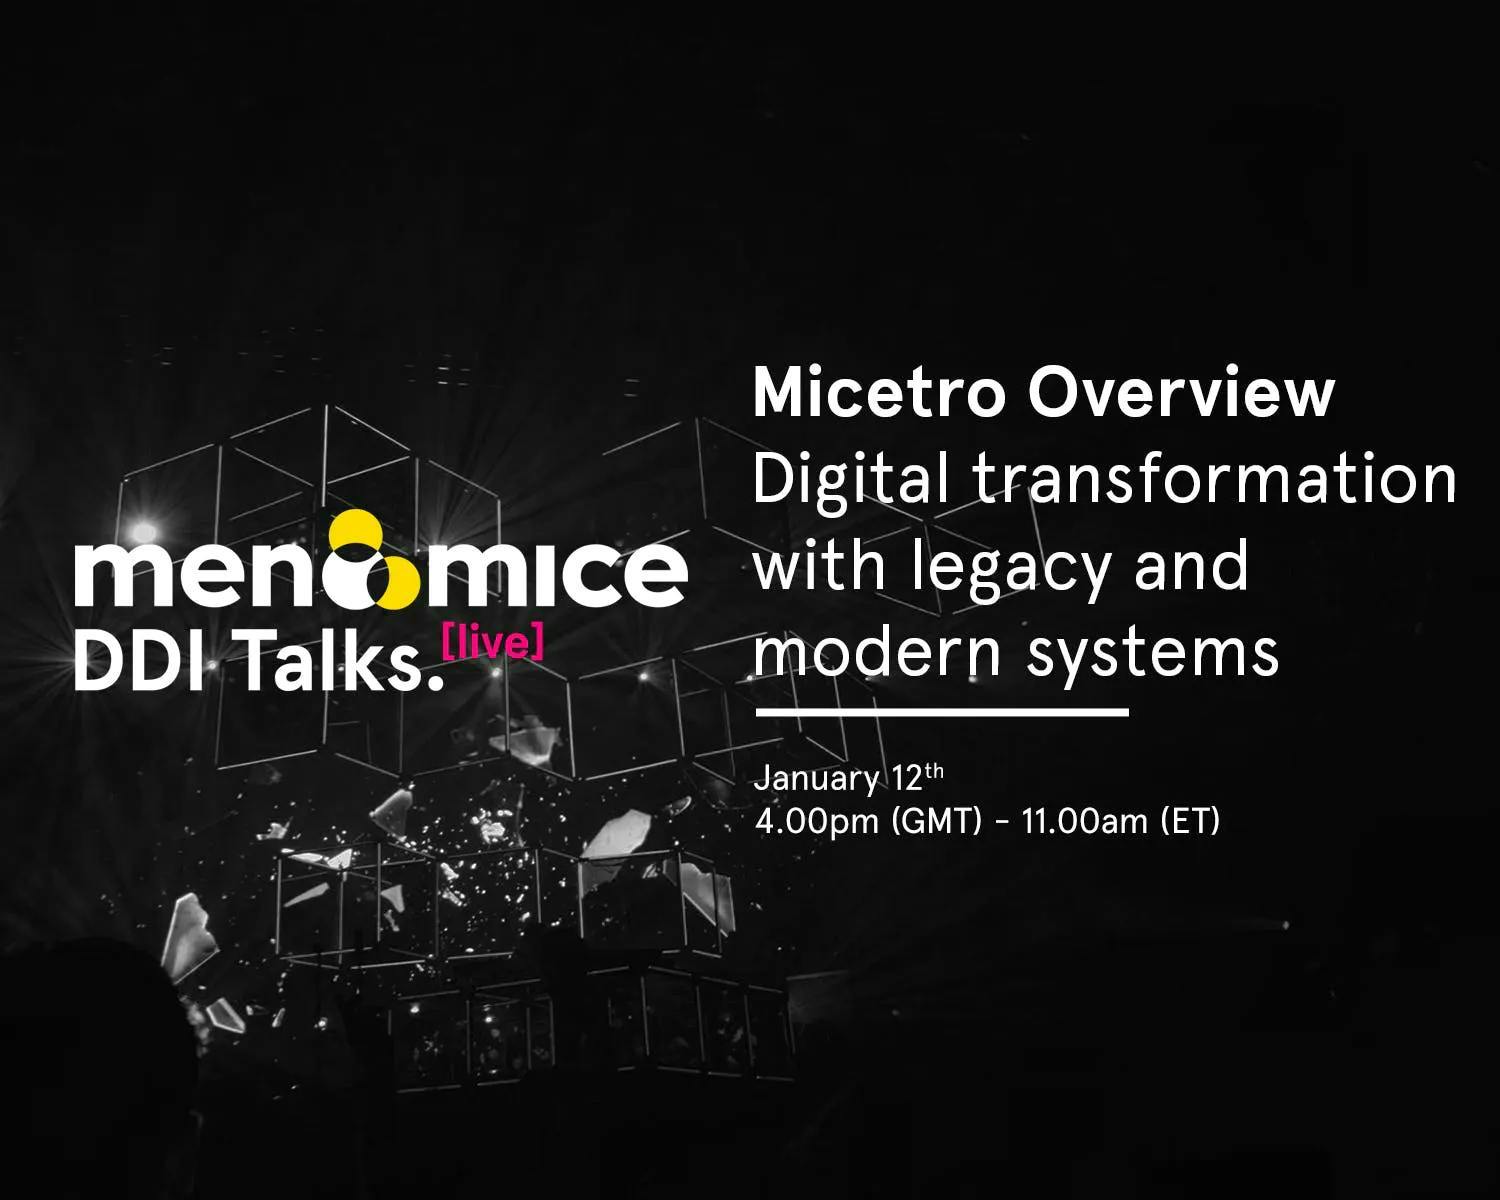 Micetro Overview - Digital Transformation with legacy and modern systems